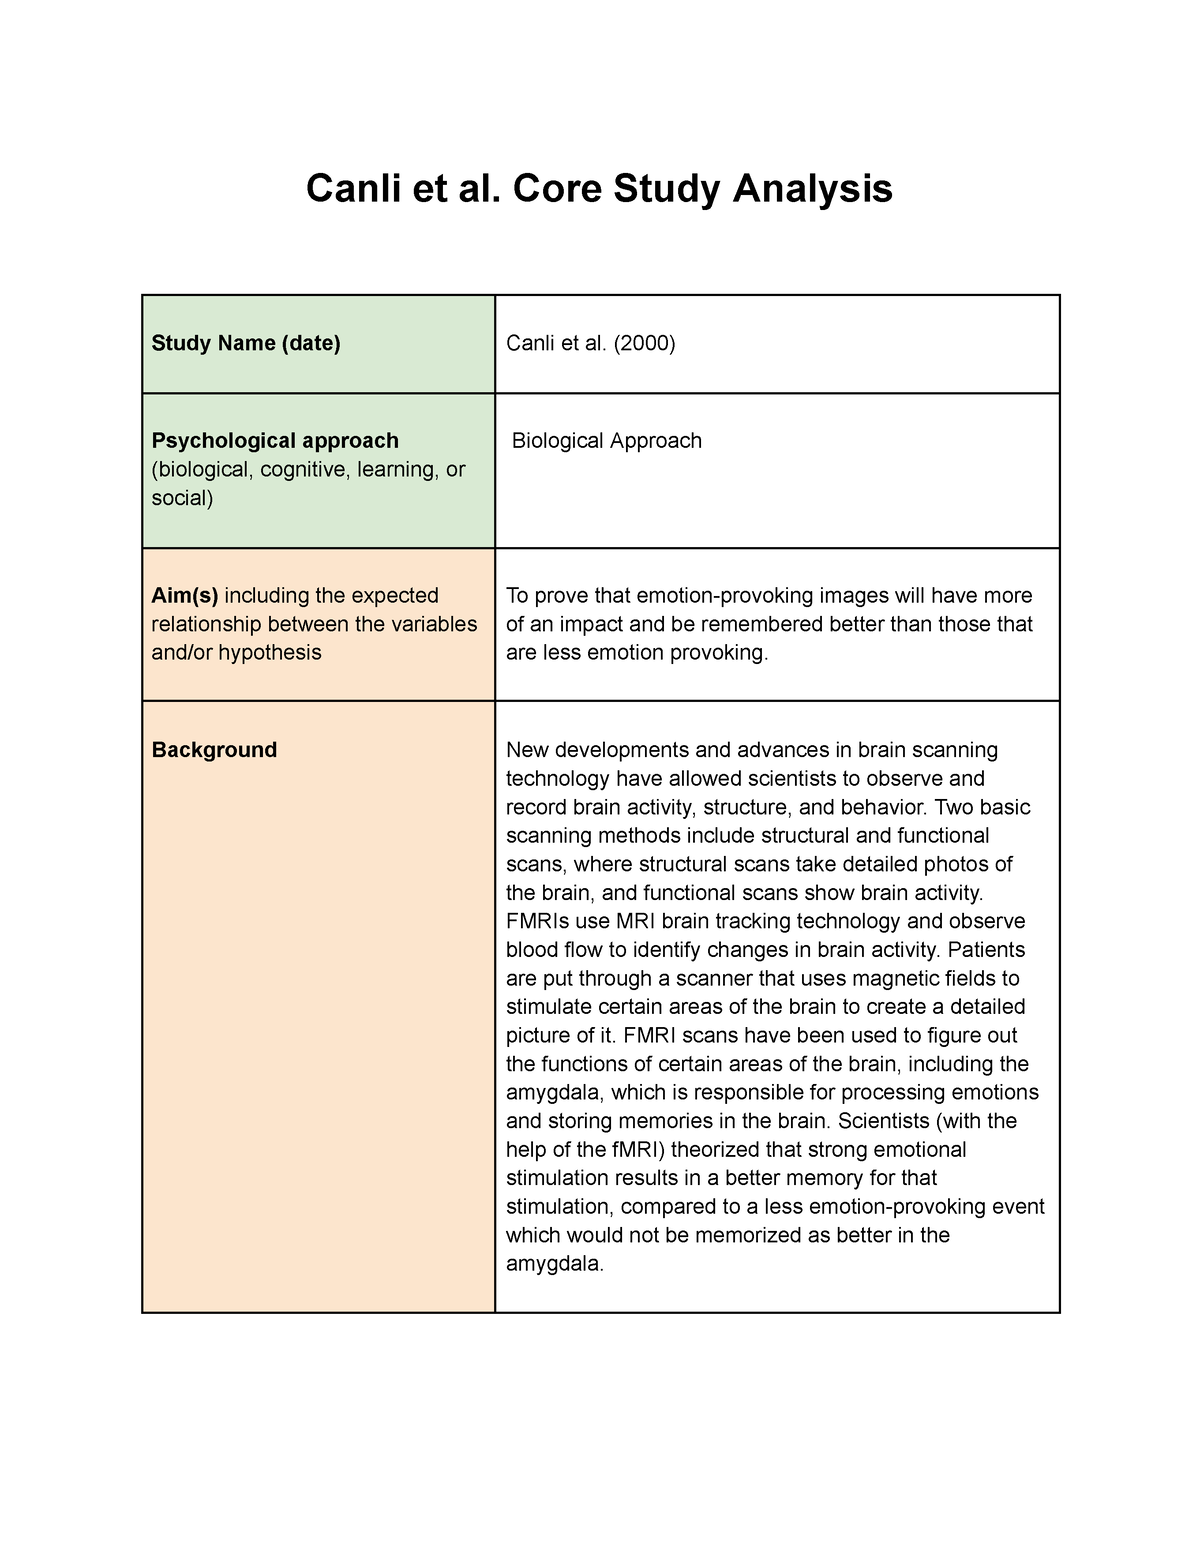 research design of canli study